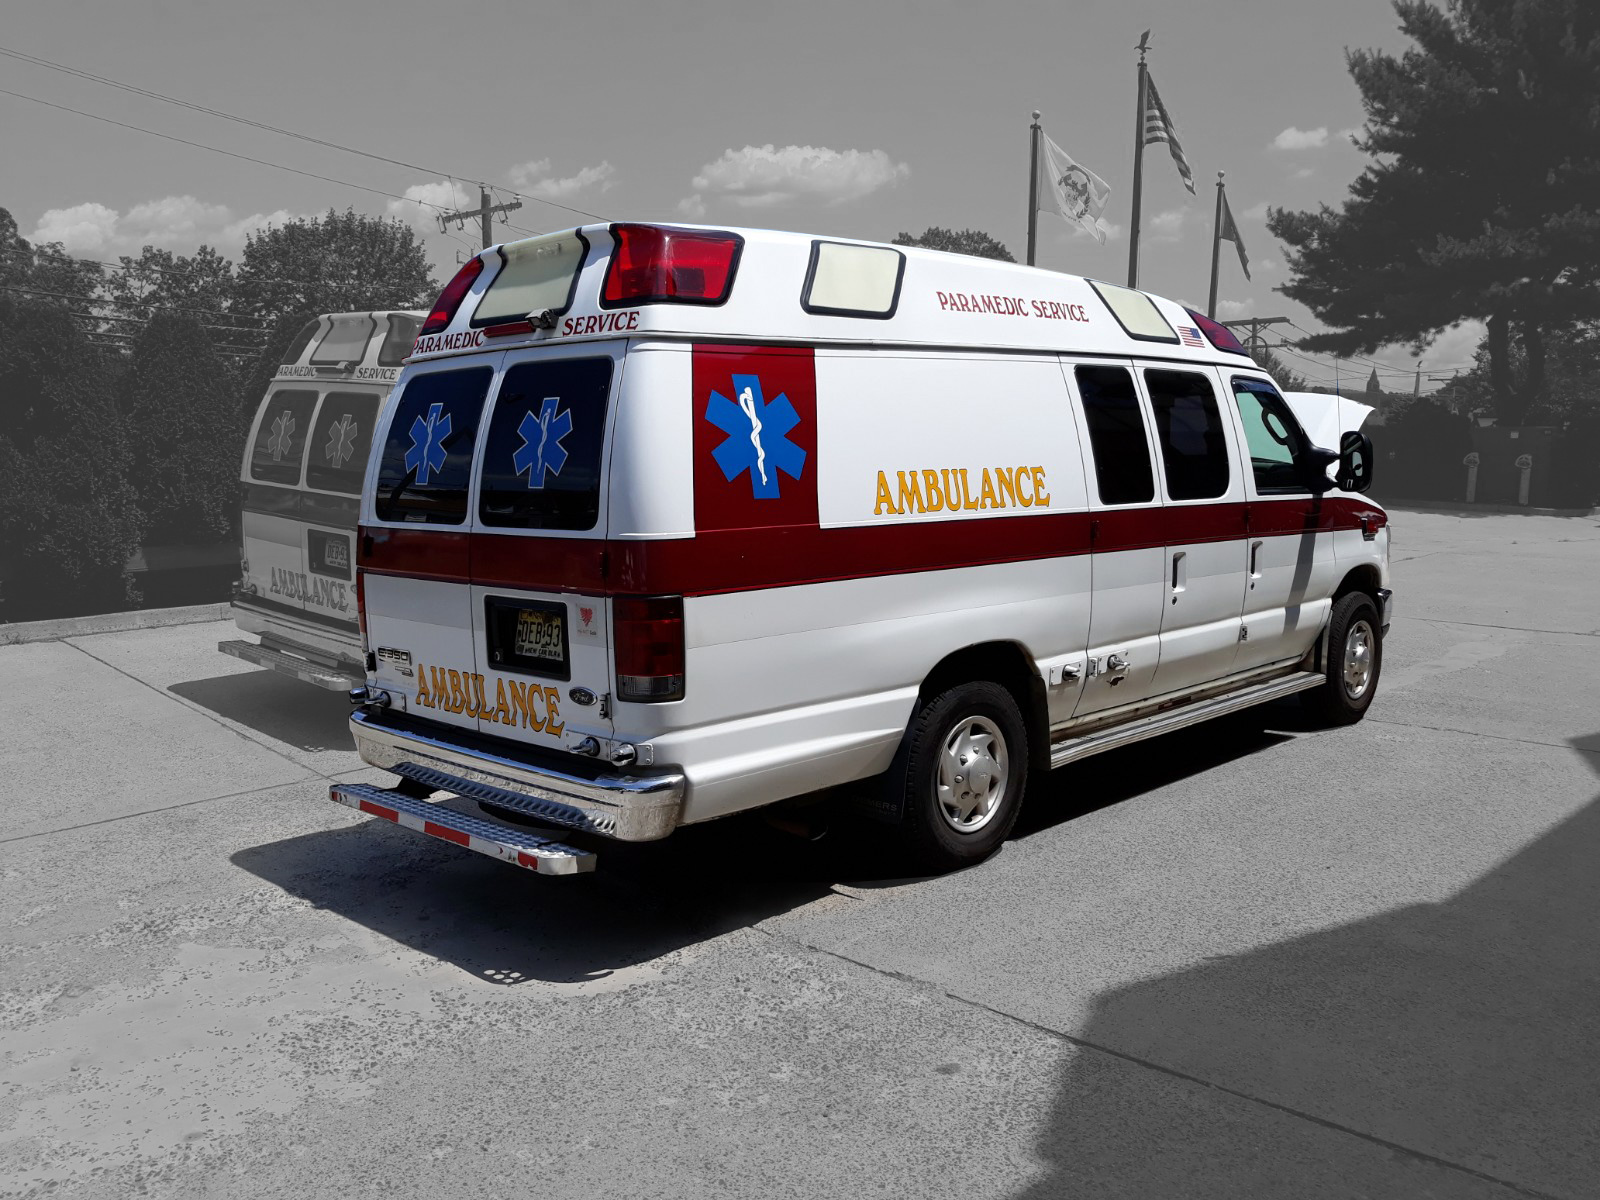 2013 Ford E350 Demers Gas Type 2 Used Ambulance For Sale 02